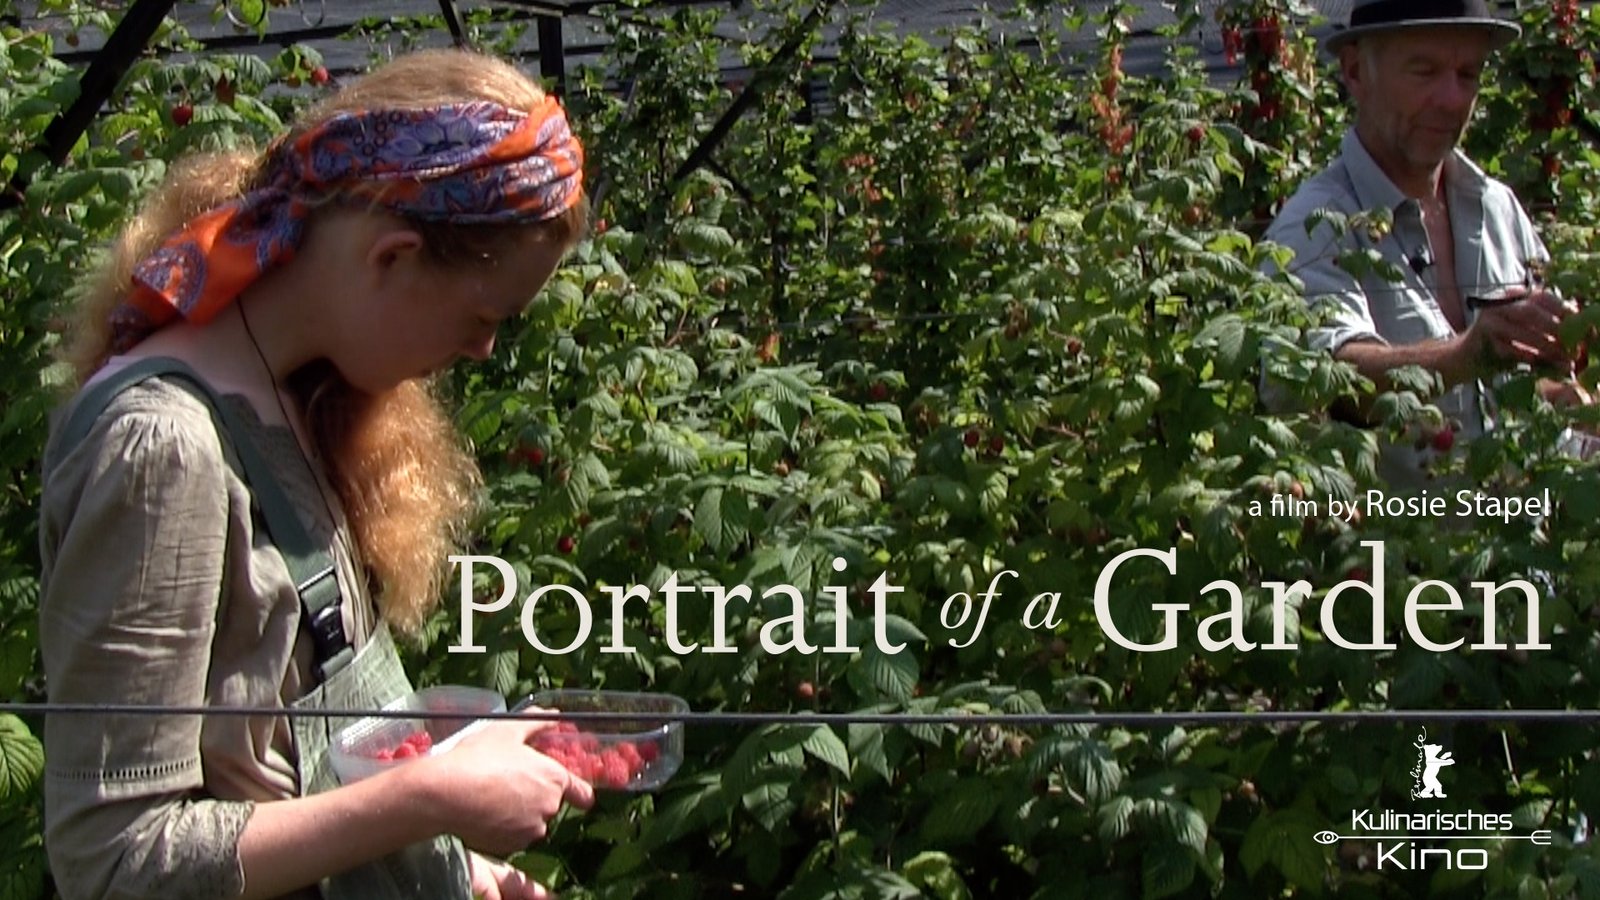 Portrait of a Garden - A Historic Dutch Garden and the People Who Tend It